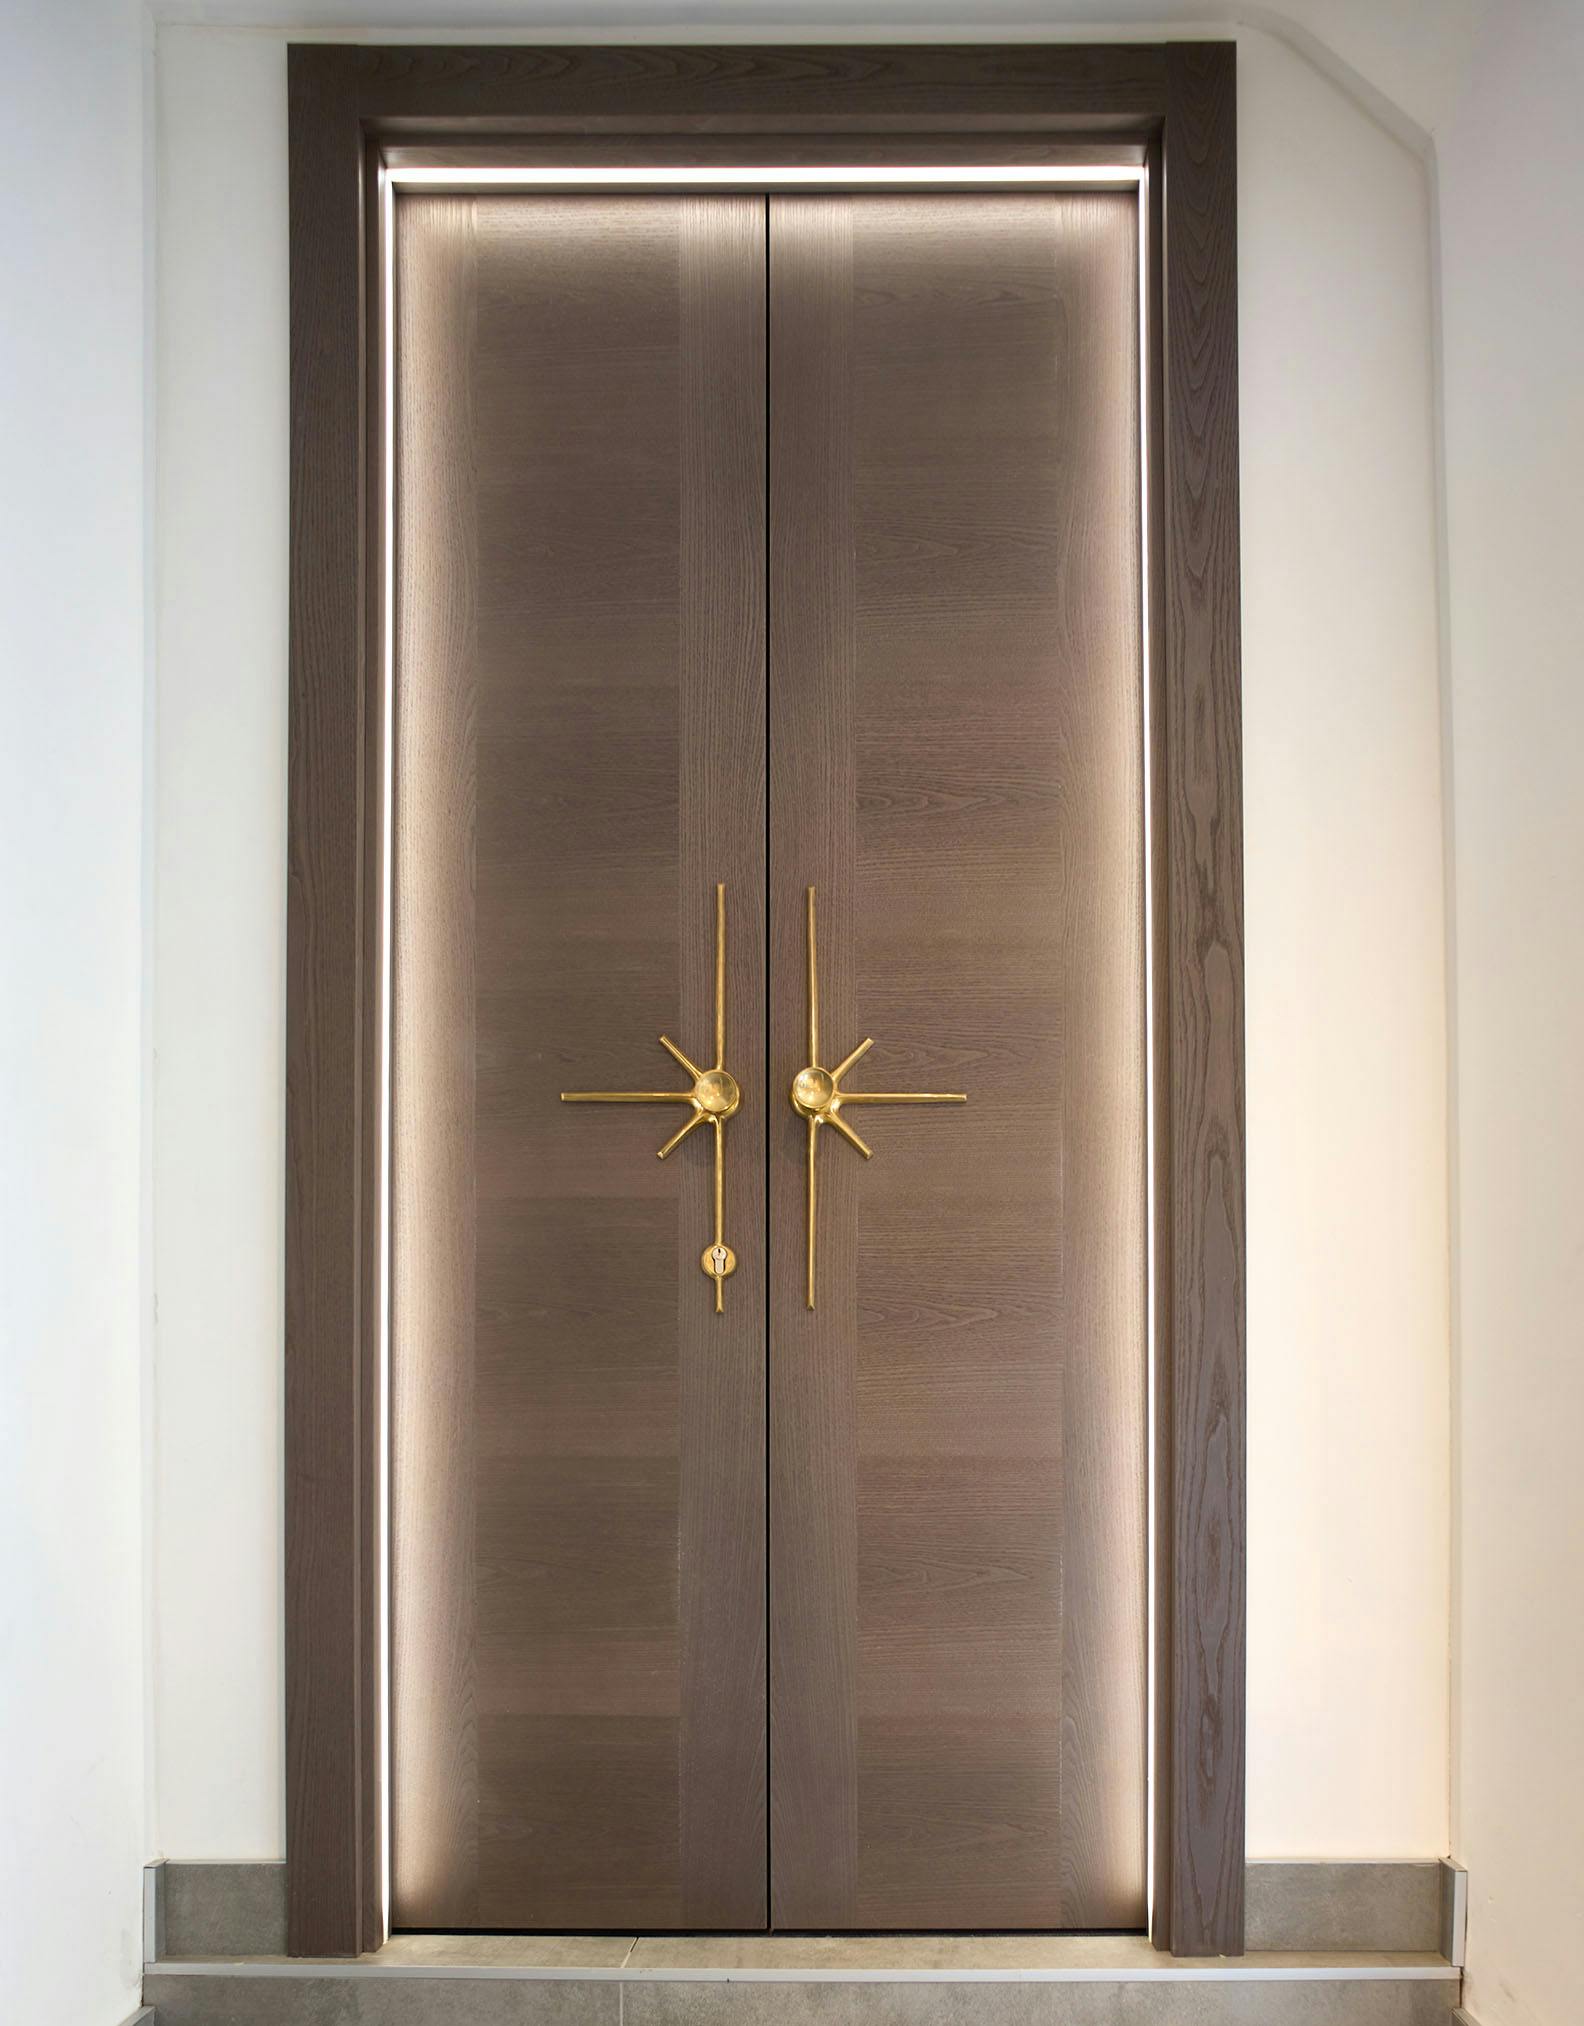 Bespoke double door set with LED lighting set within the door frame that wraps around and illuminates the doors.